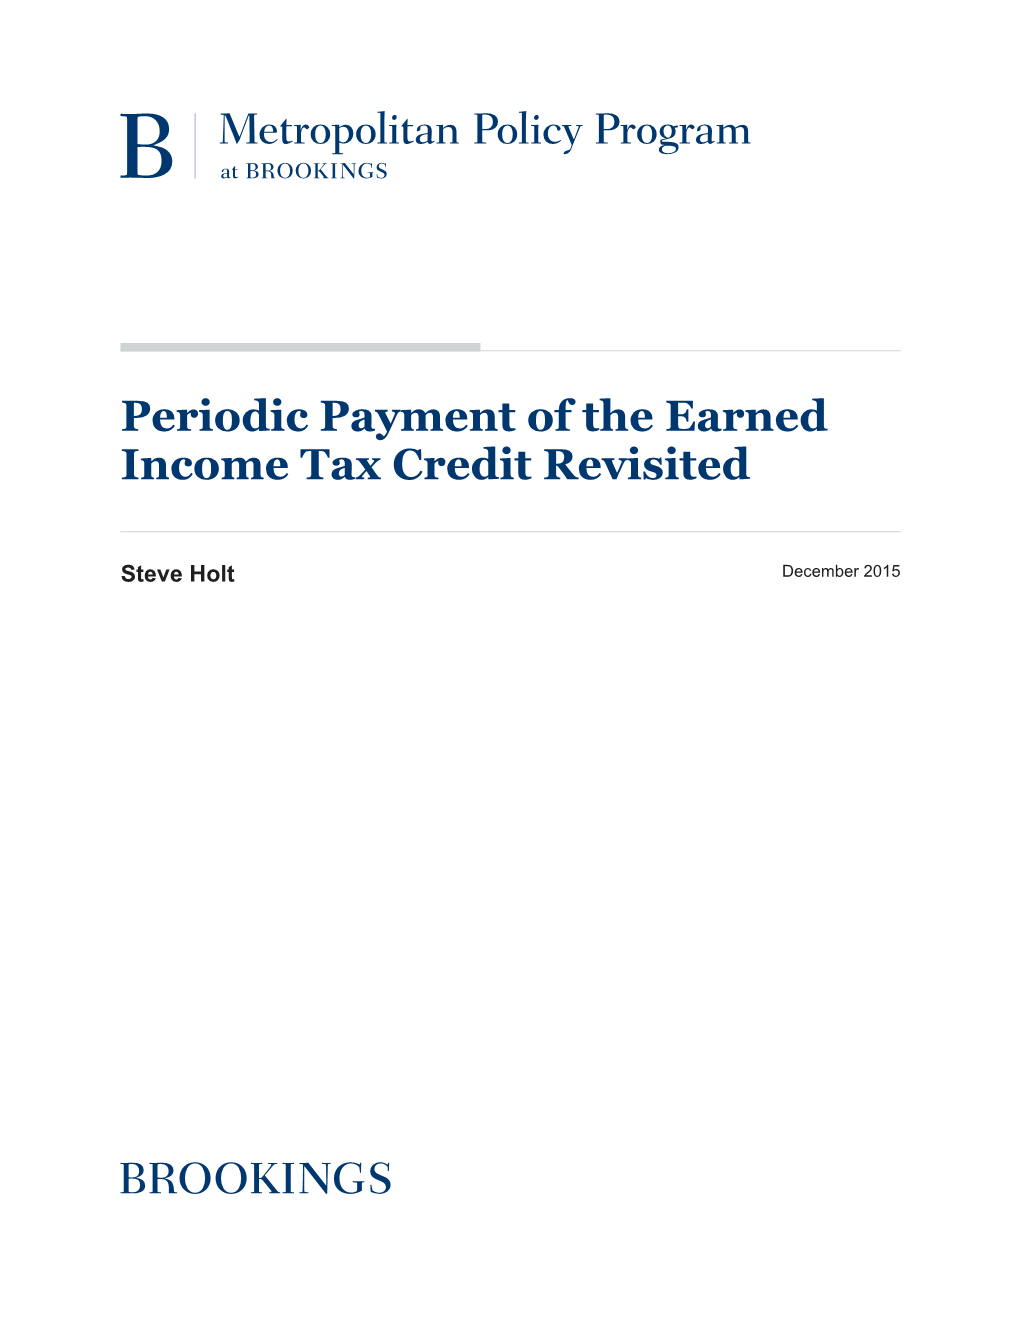 Periodic Payment of the Earned Income Tax Credit Revisited